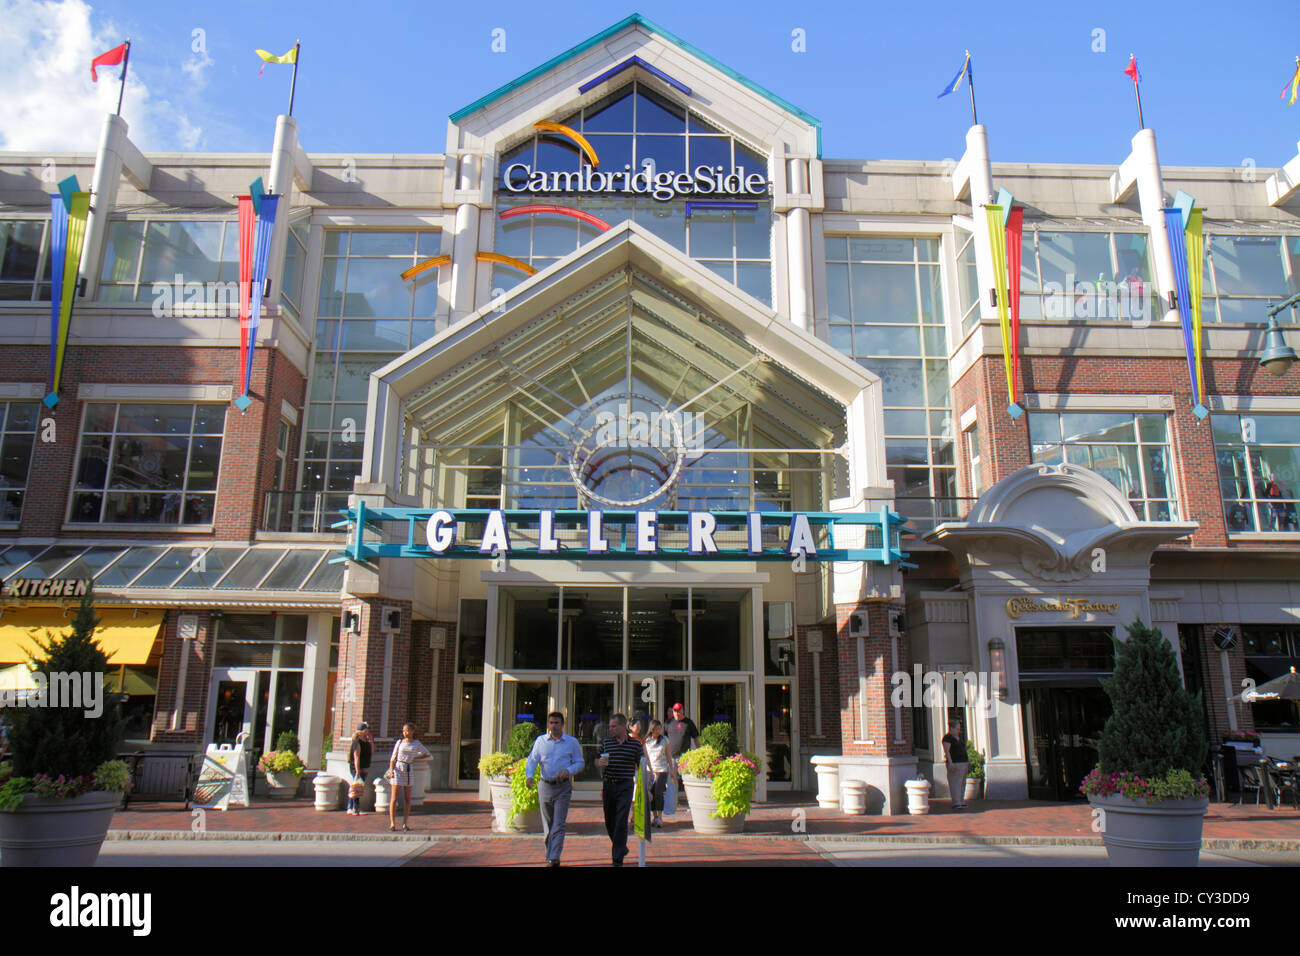 Shopping In Boston Outlet Malls | Walden Wong